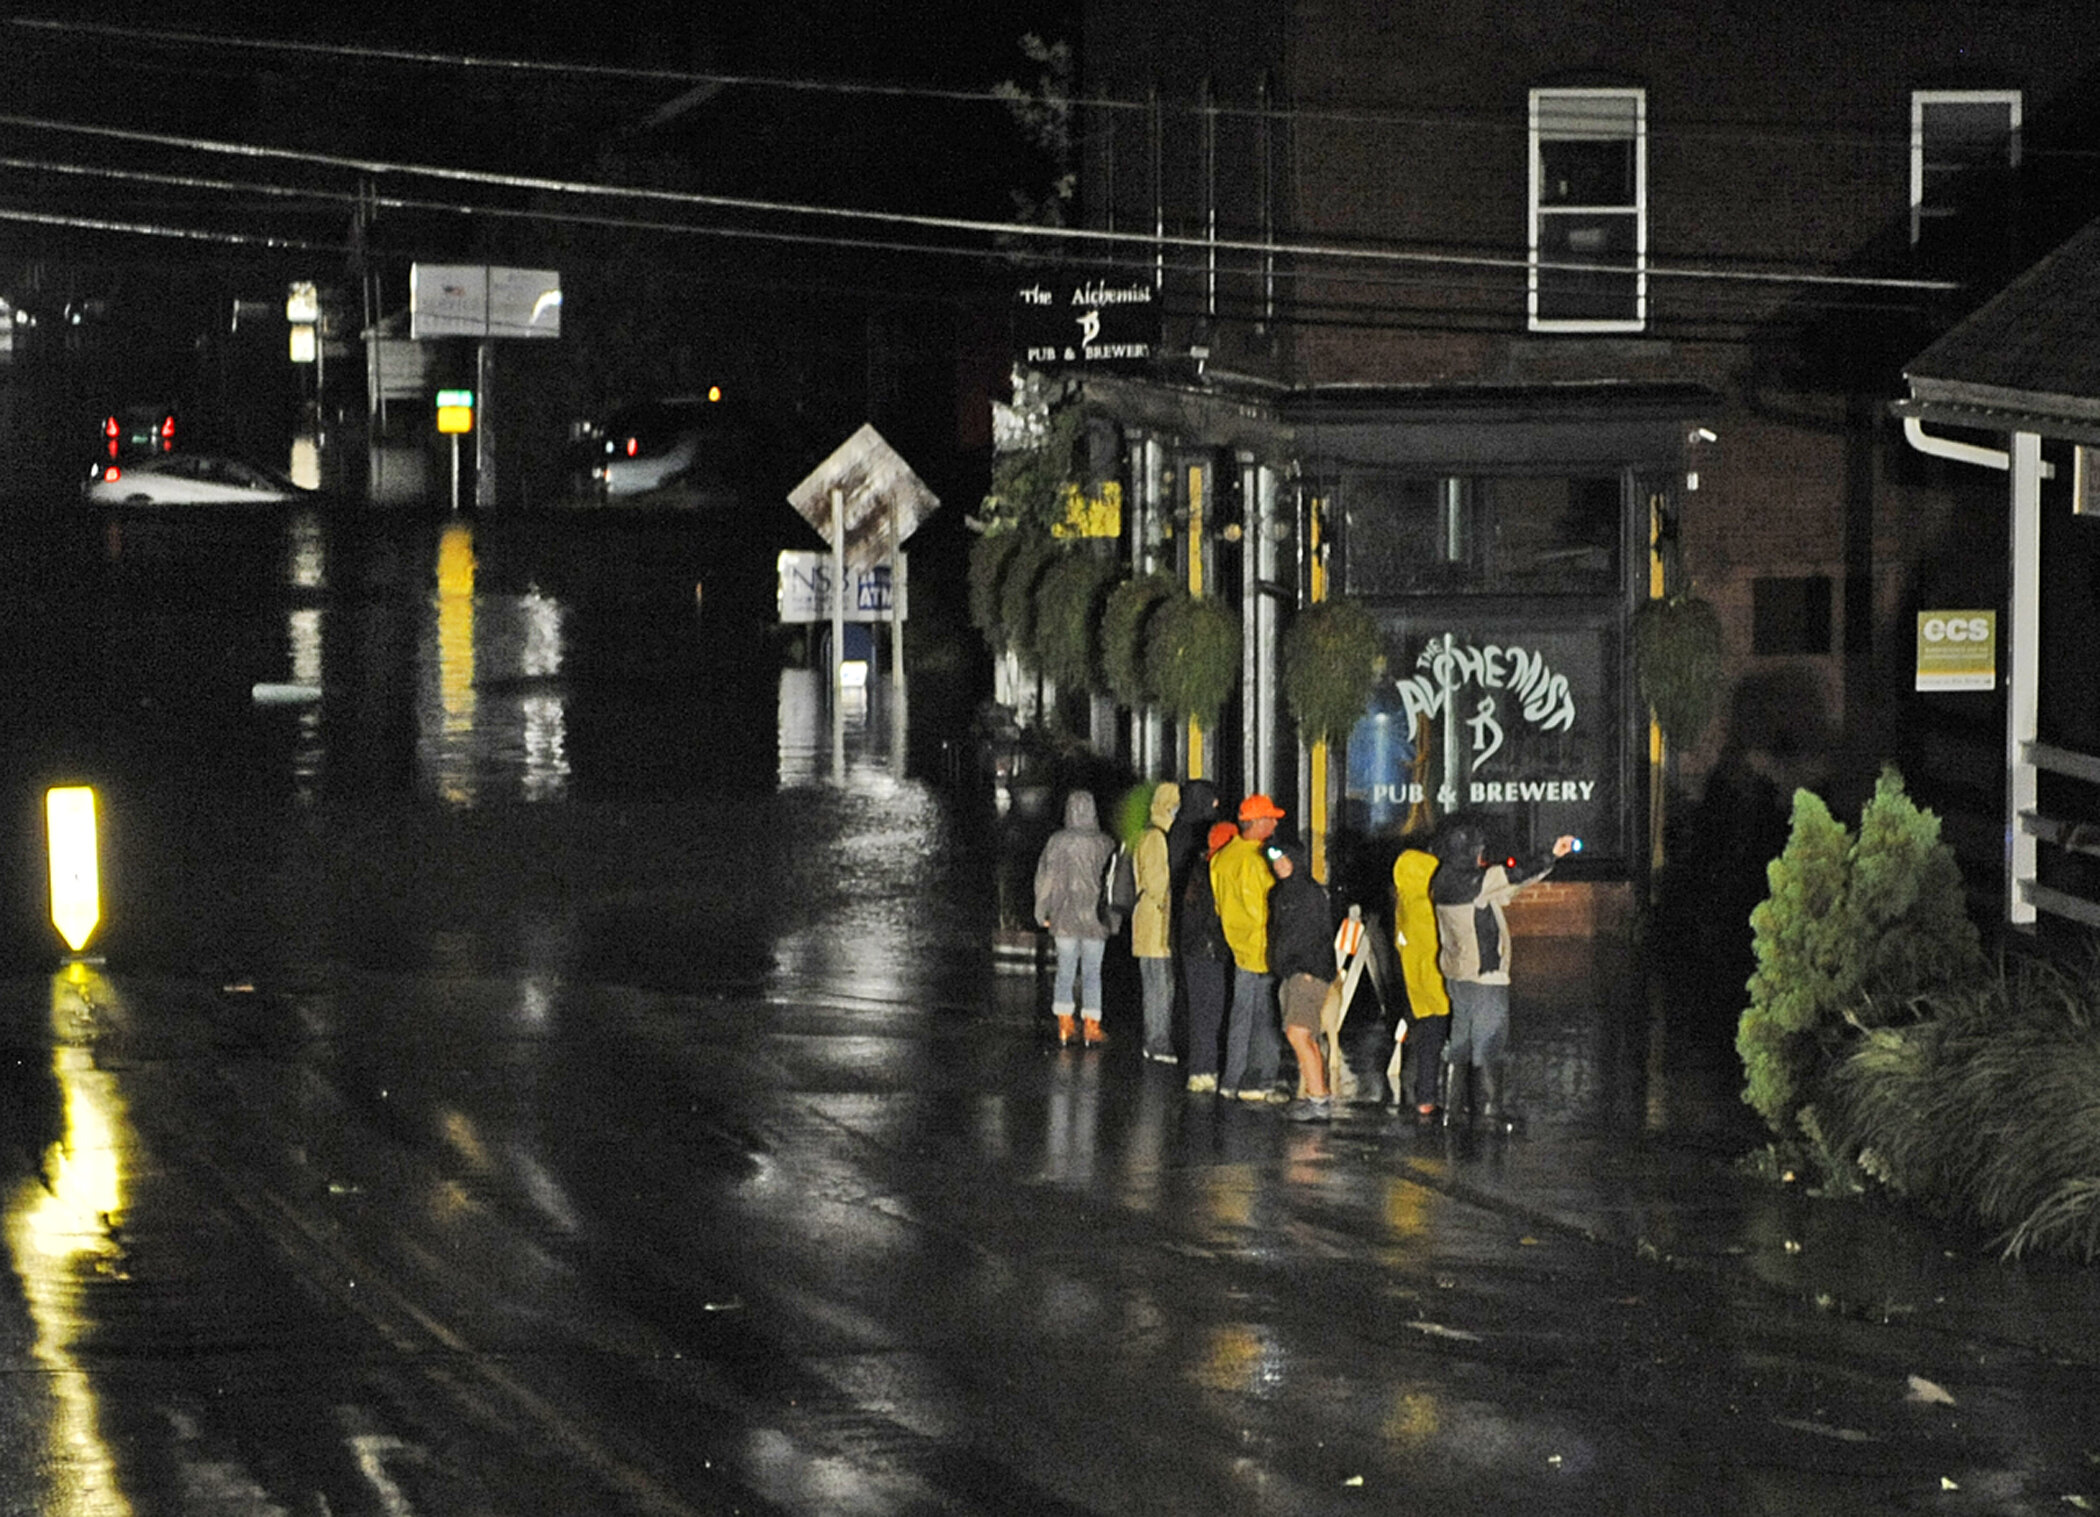  Downtown residents left their homes for higher ground as the water rose. Photo by Gordon Miller 